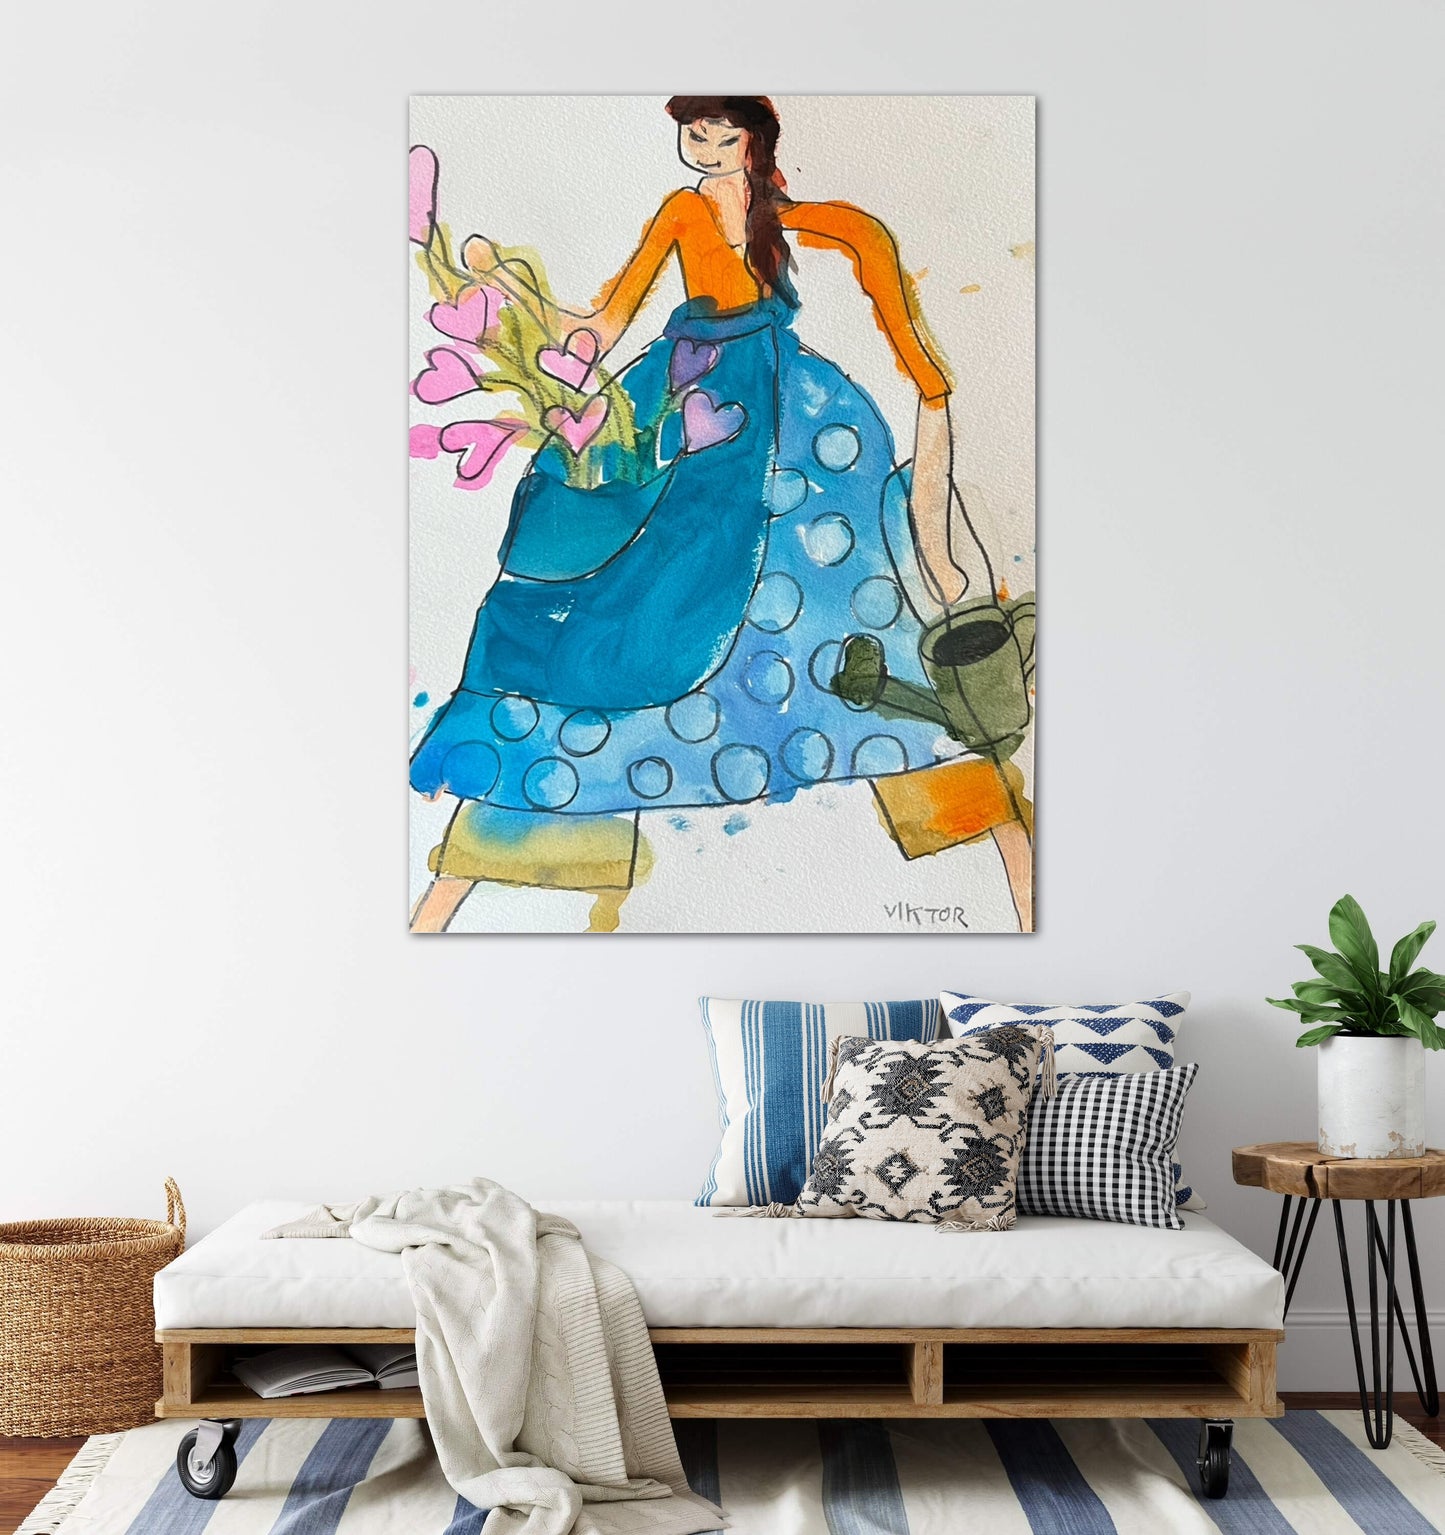 Collection: The Beauty of a Woman, art II - Print, Poster, Stretched Canvas Print